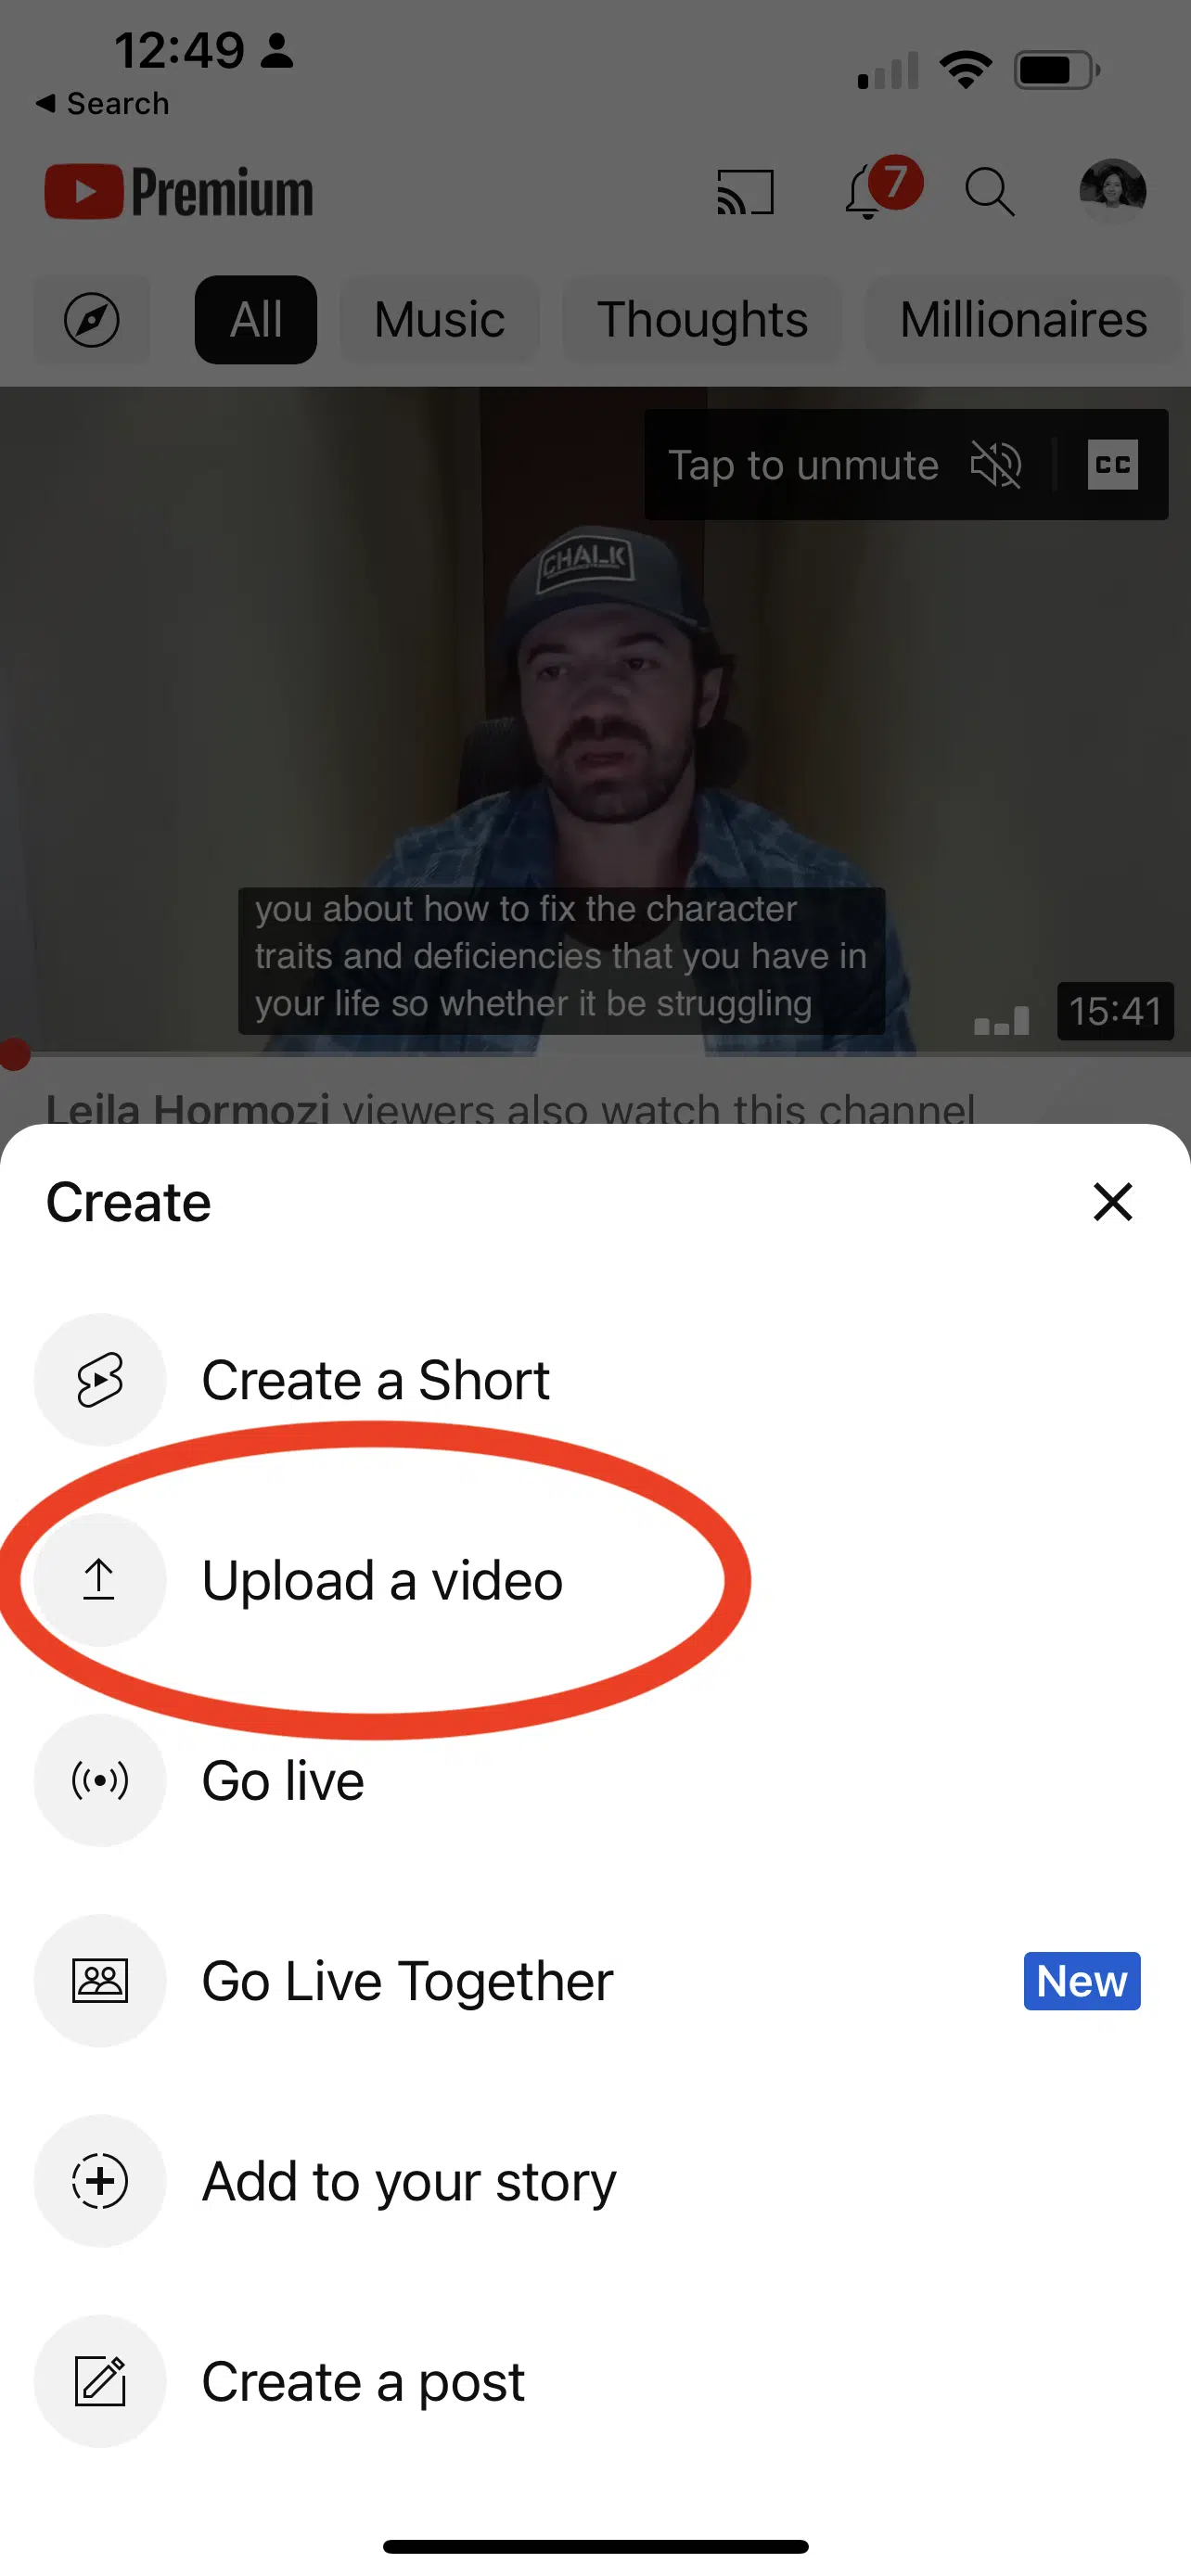 How to upload a video to YouTube from iPhone (2023)